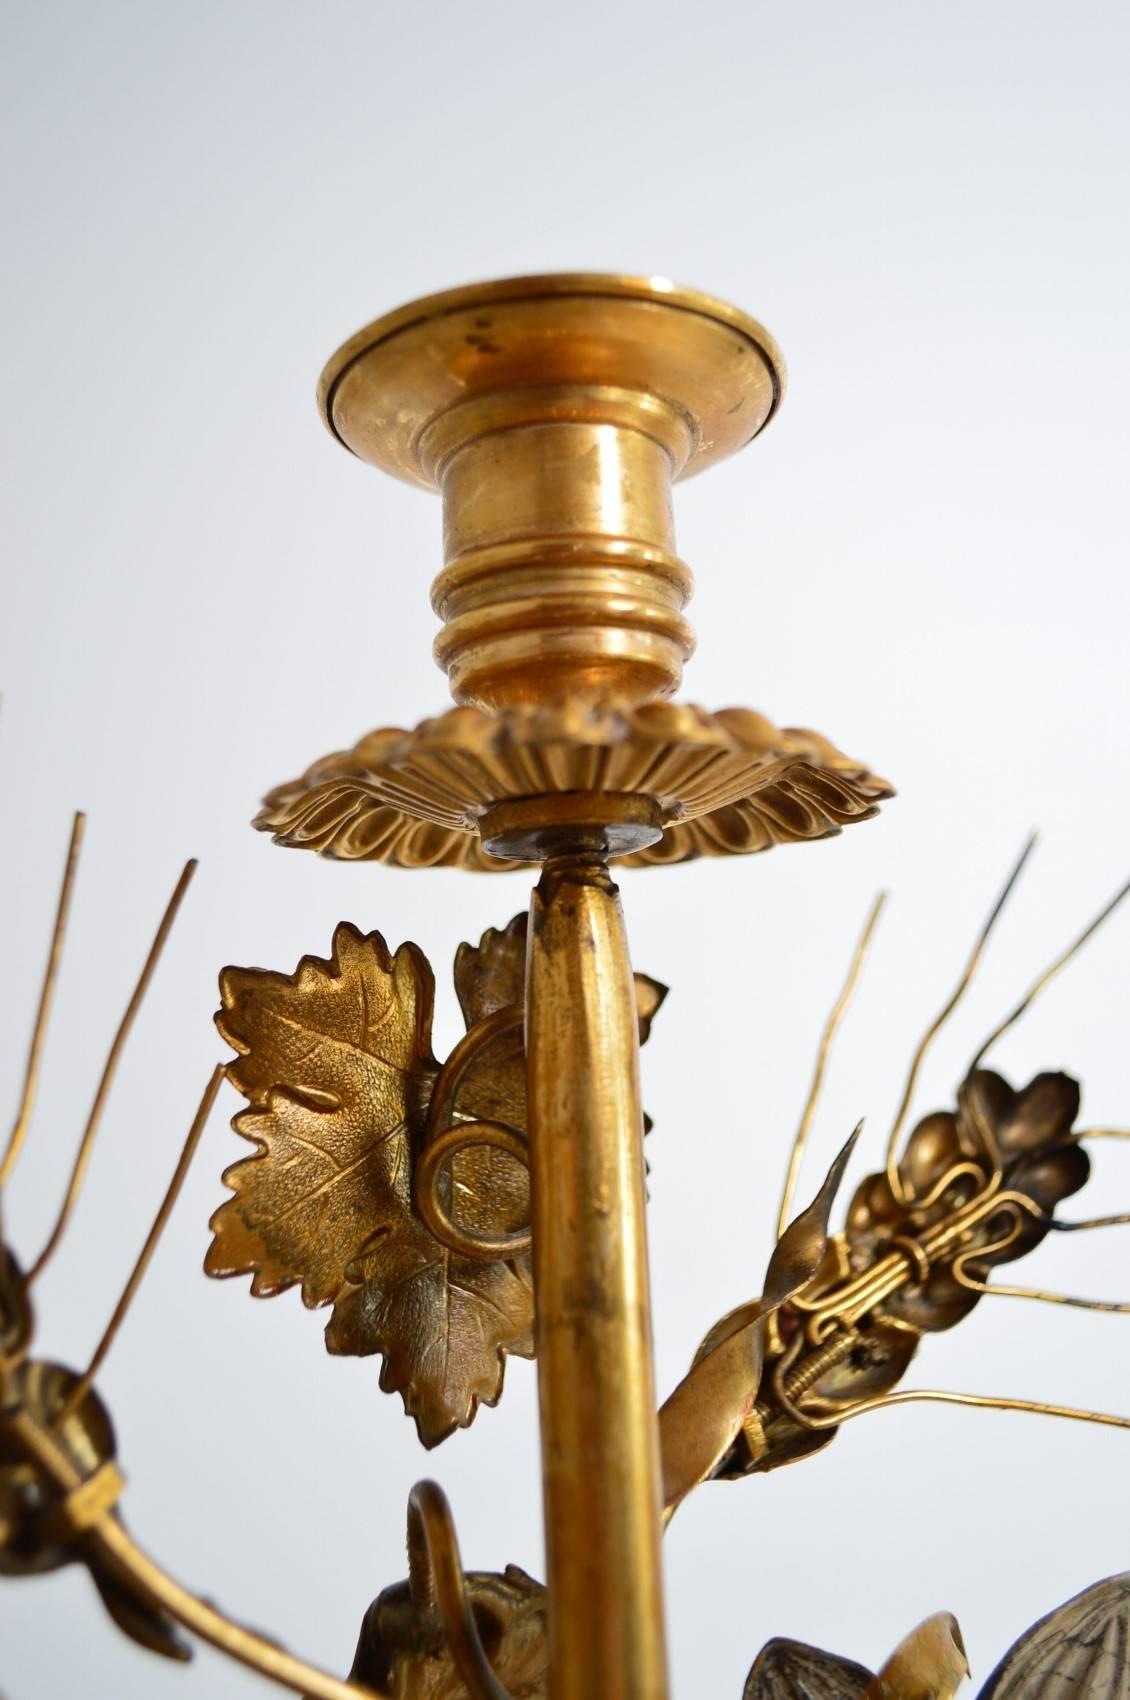 French Antique Decorative Candlestick Holders with Flowers, Leafs and Wheat, 1890s